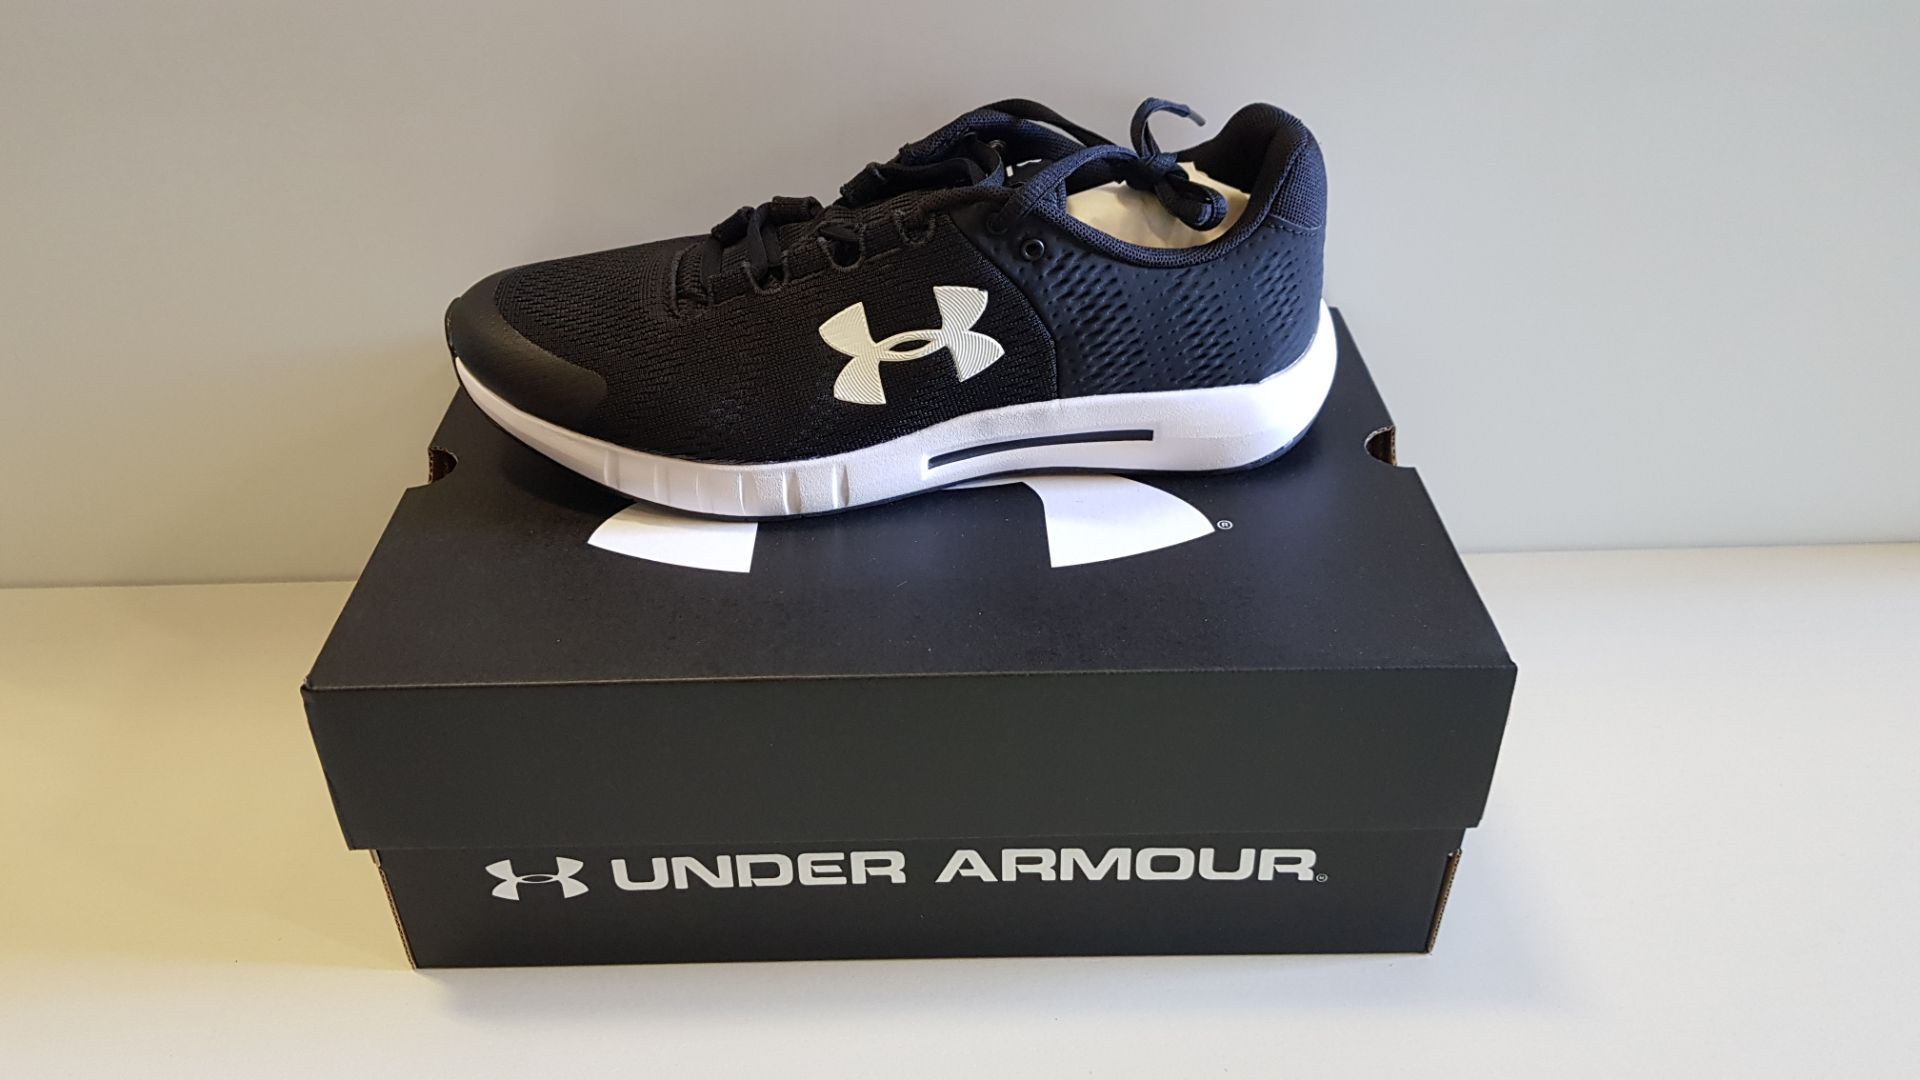 6 X BRAND NEW UNDER ARMOUR W MICRO G PURSUIT BP TRAINERS UK SIZE 5